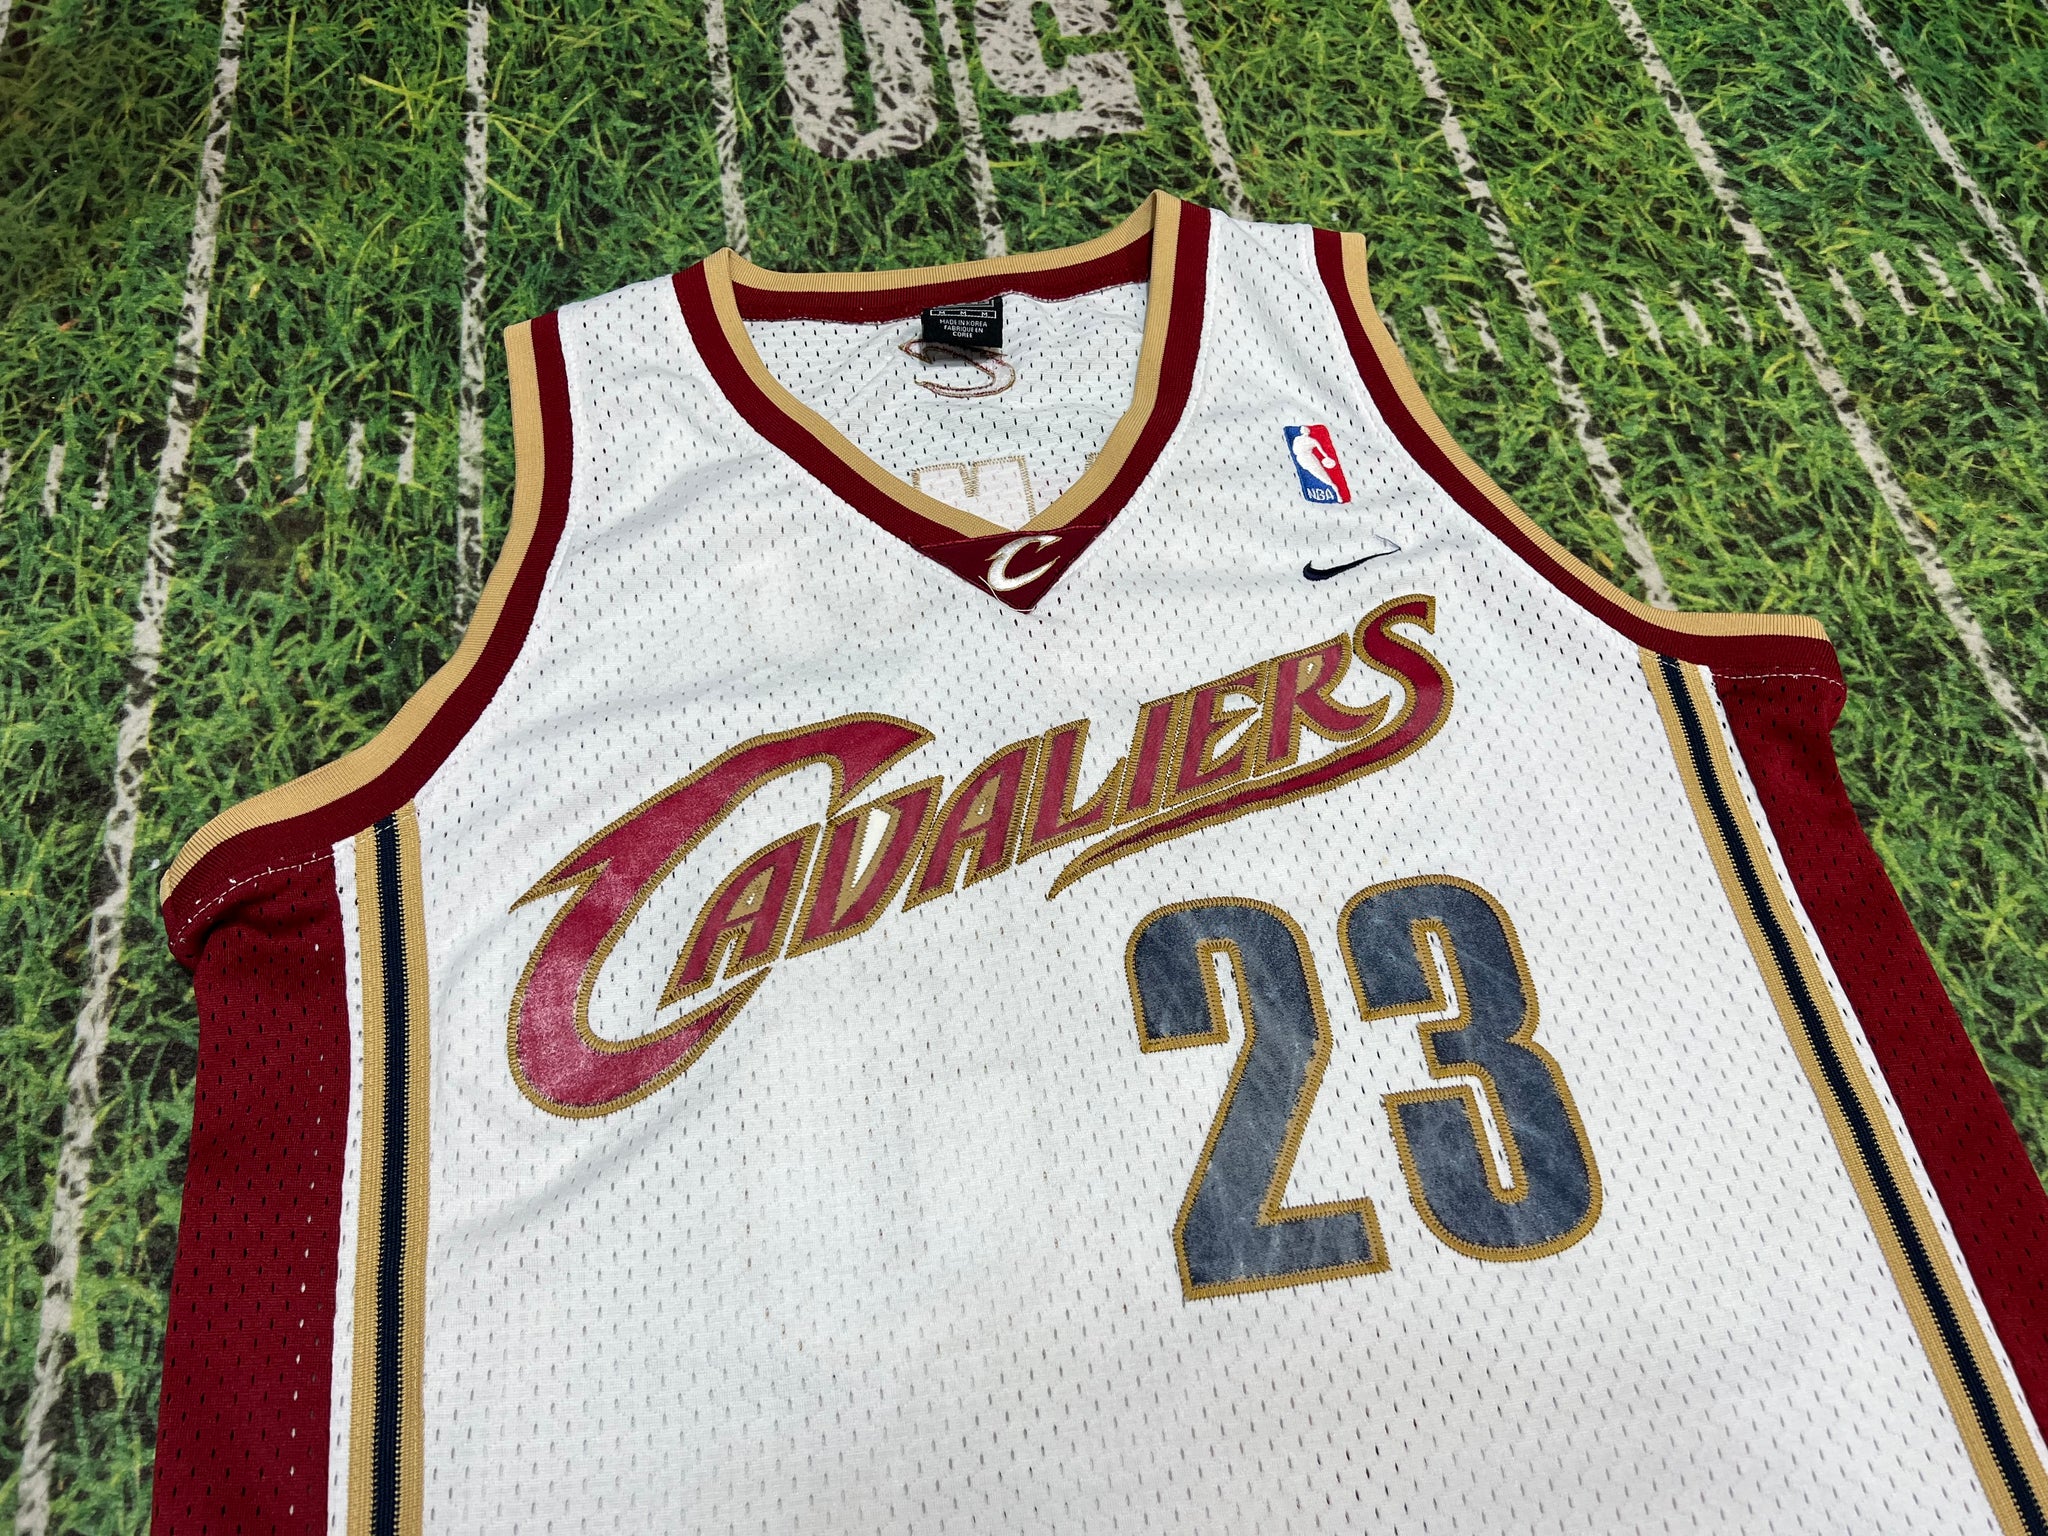 cleveland cavaliers nike jersey